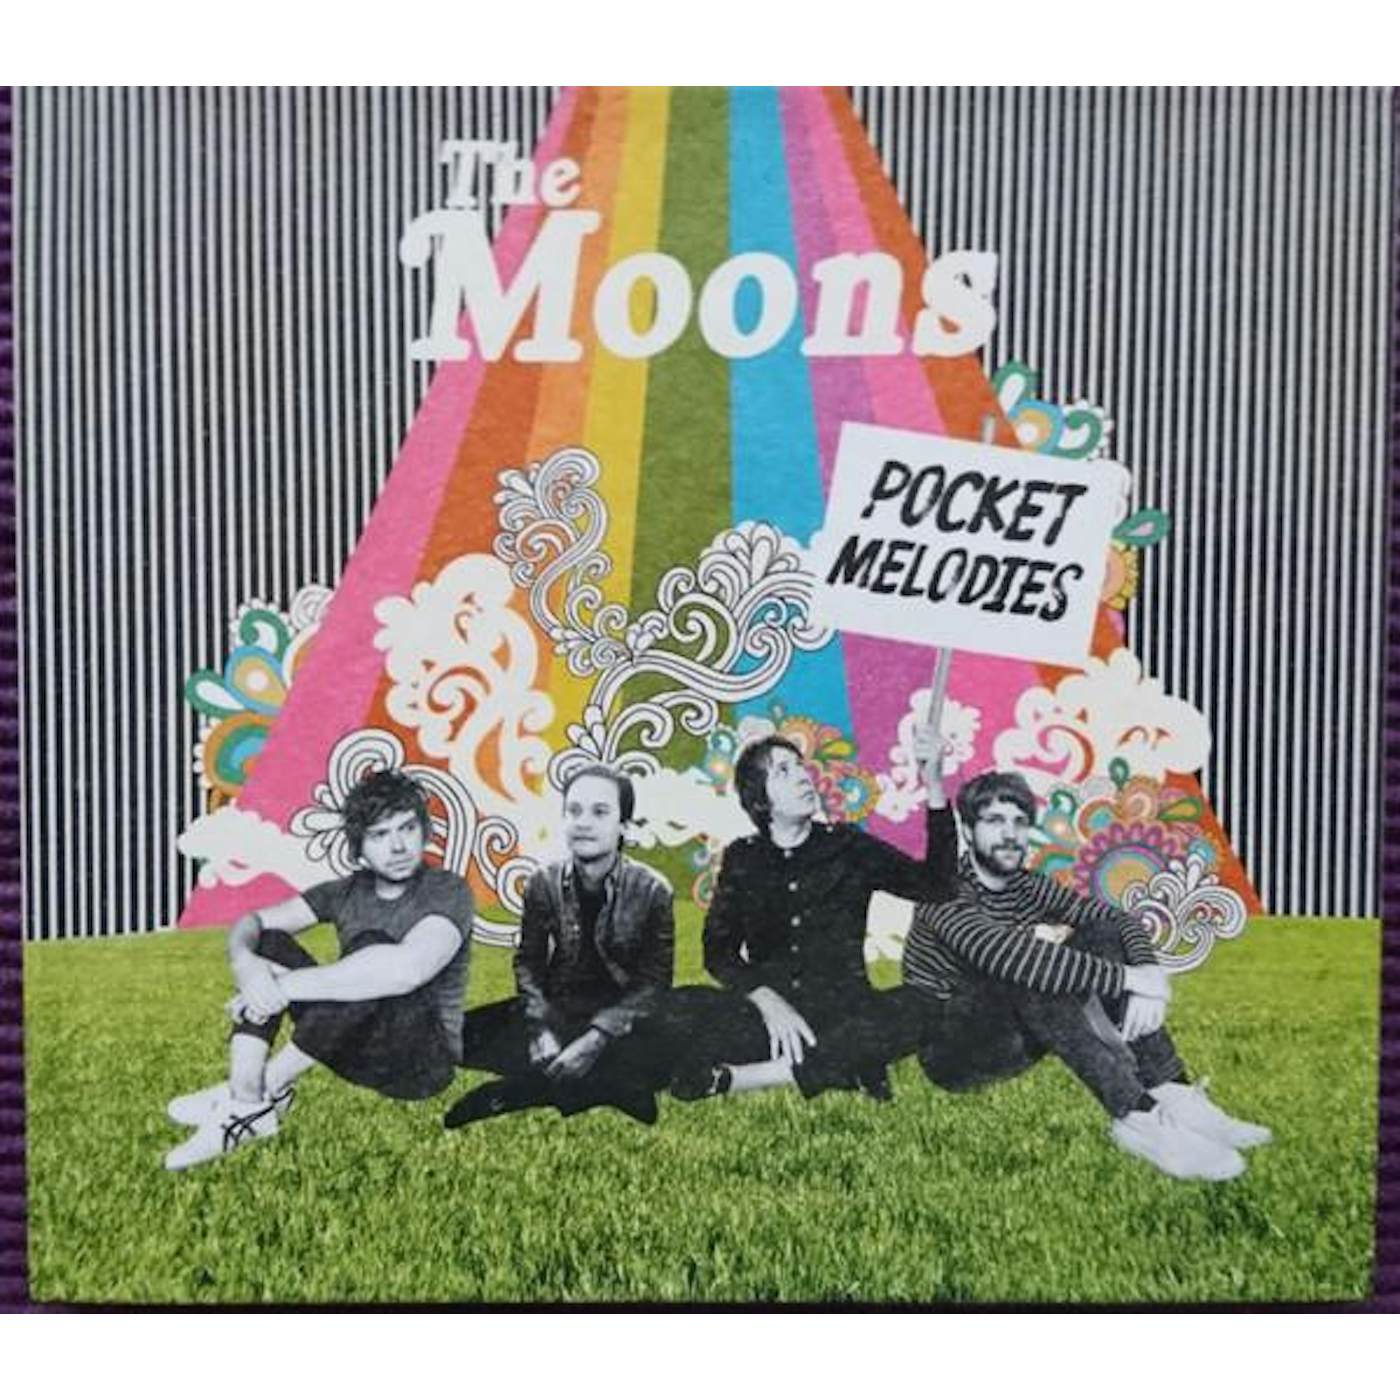 The Moons POCKET MELODIES CD